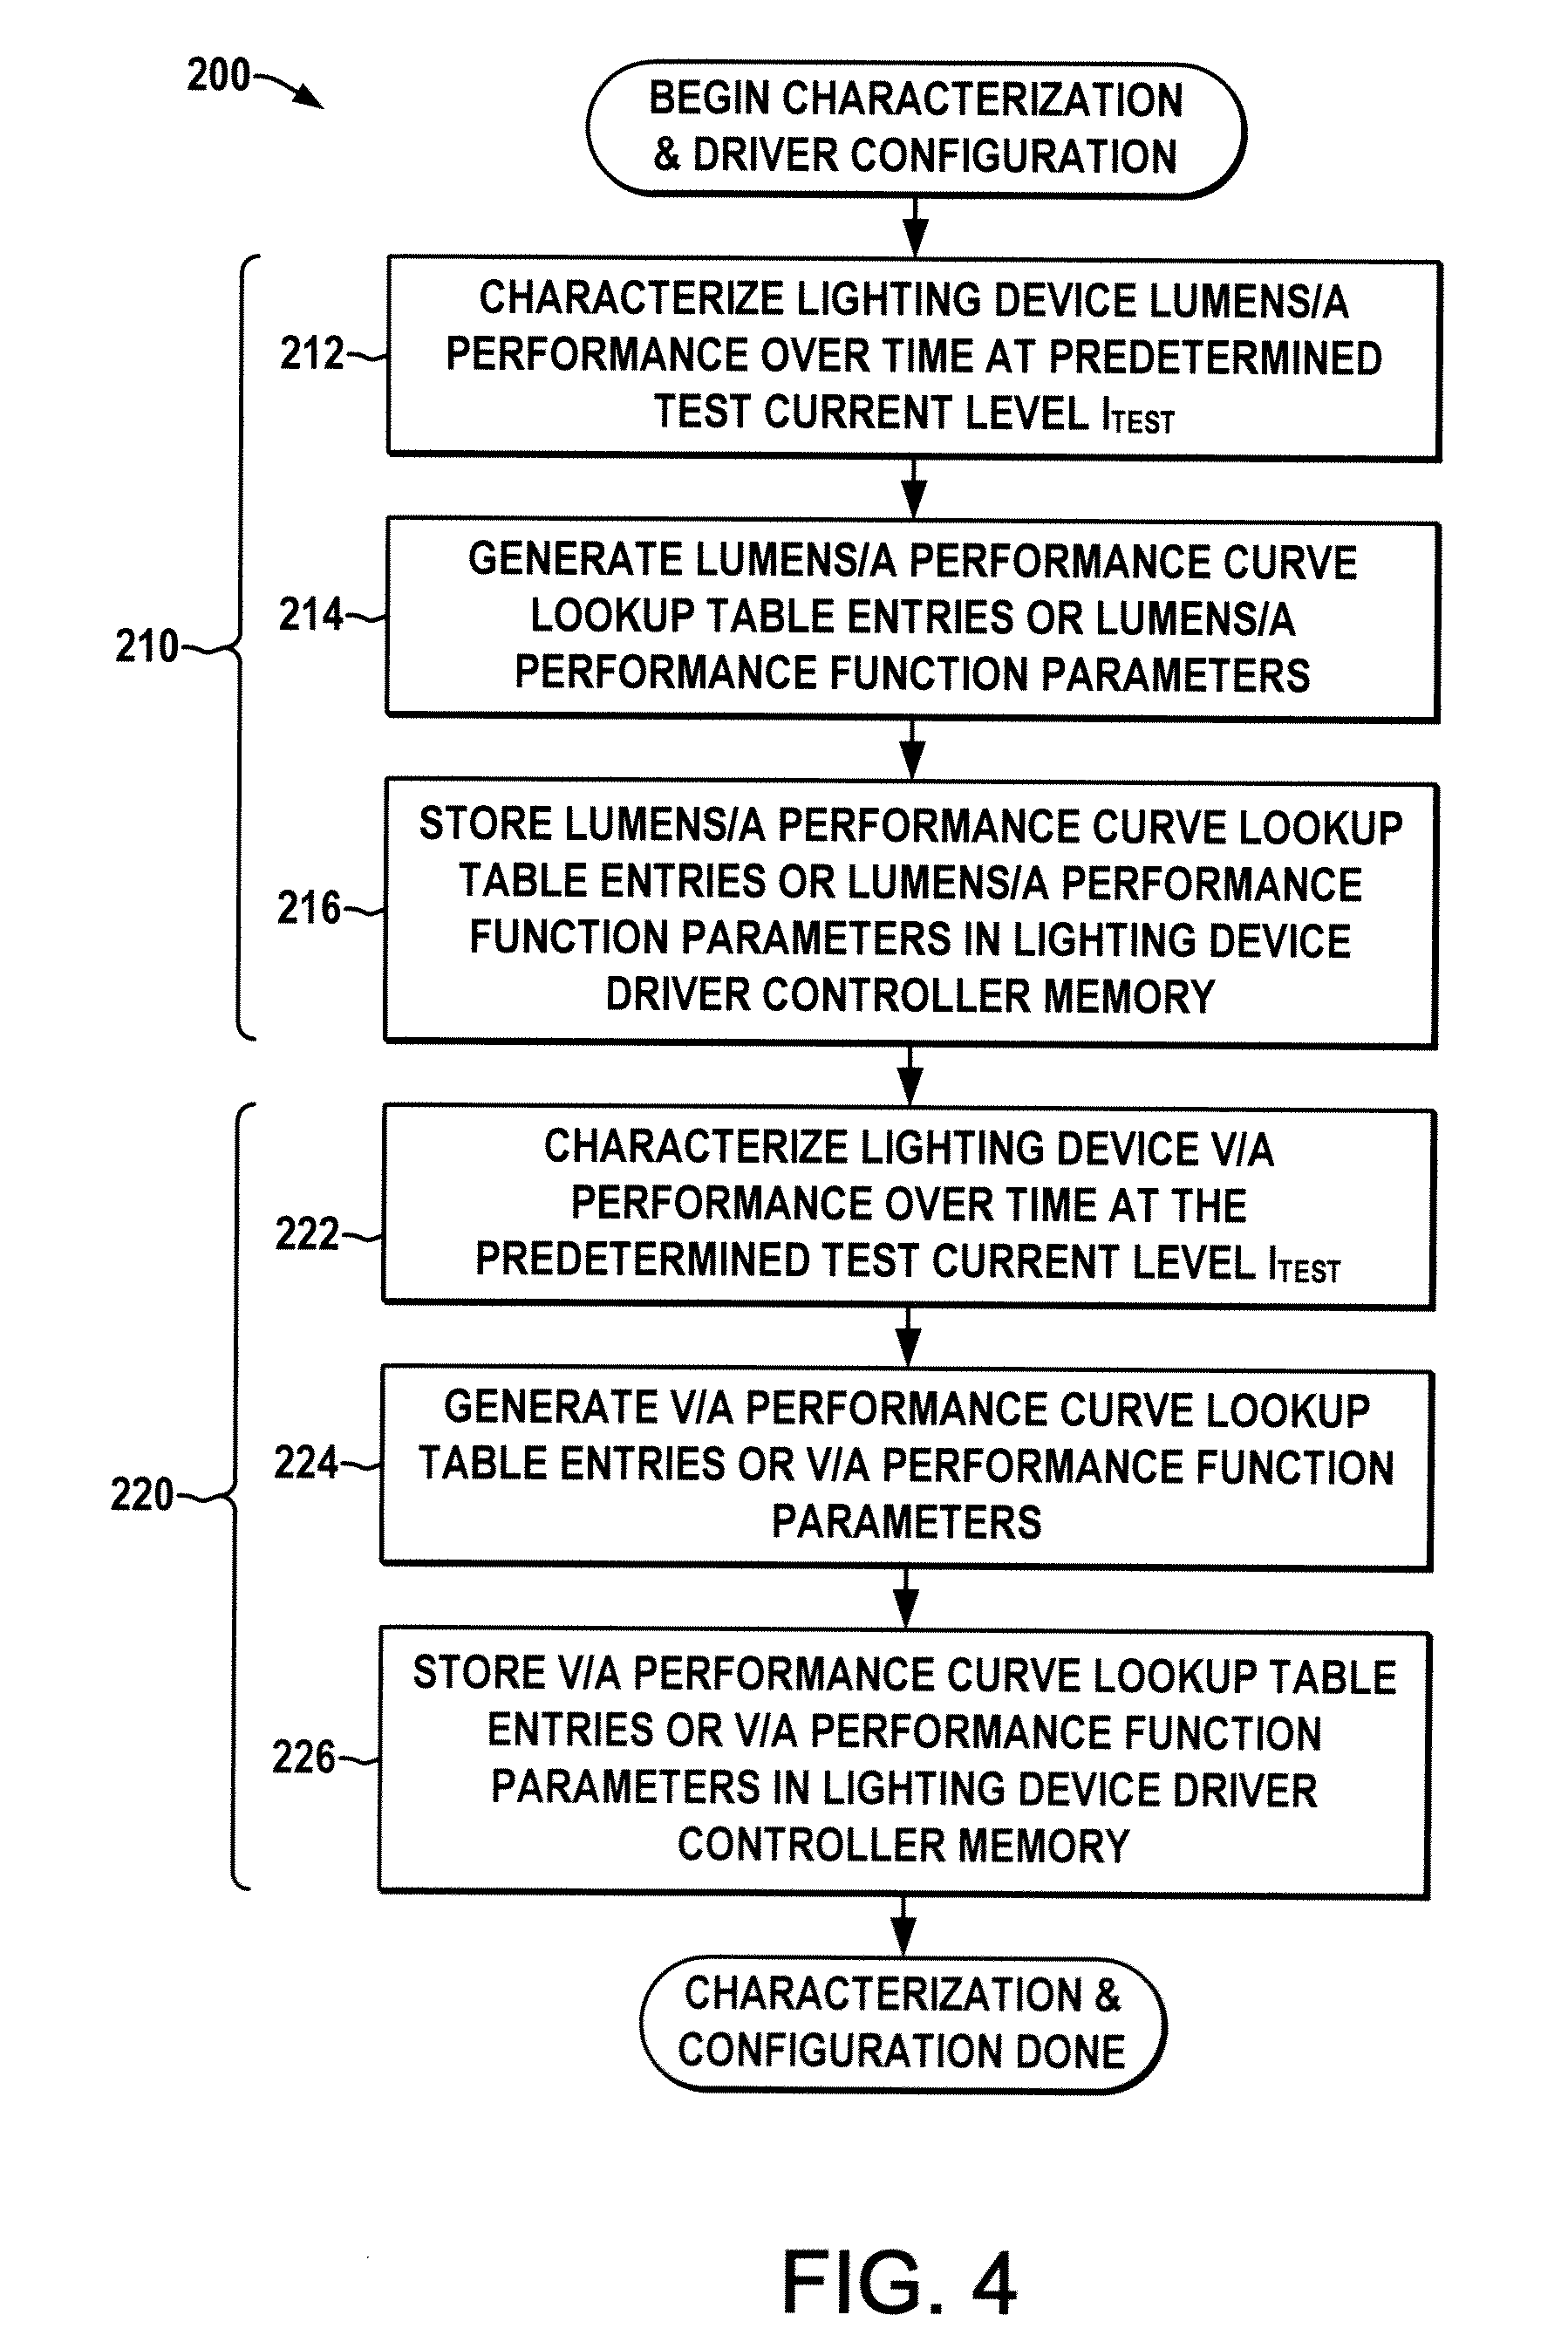 Knowledge-based driver apparatus for high lumen maintenance and end-of-life adaptation